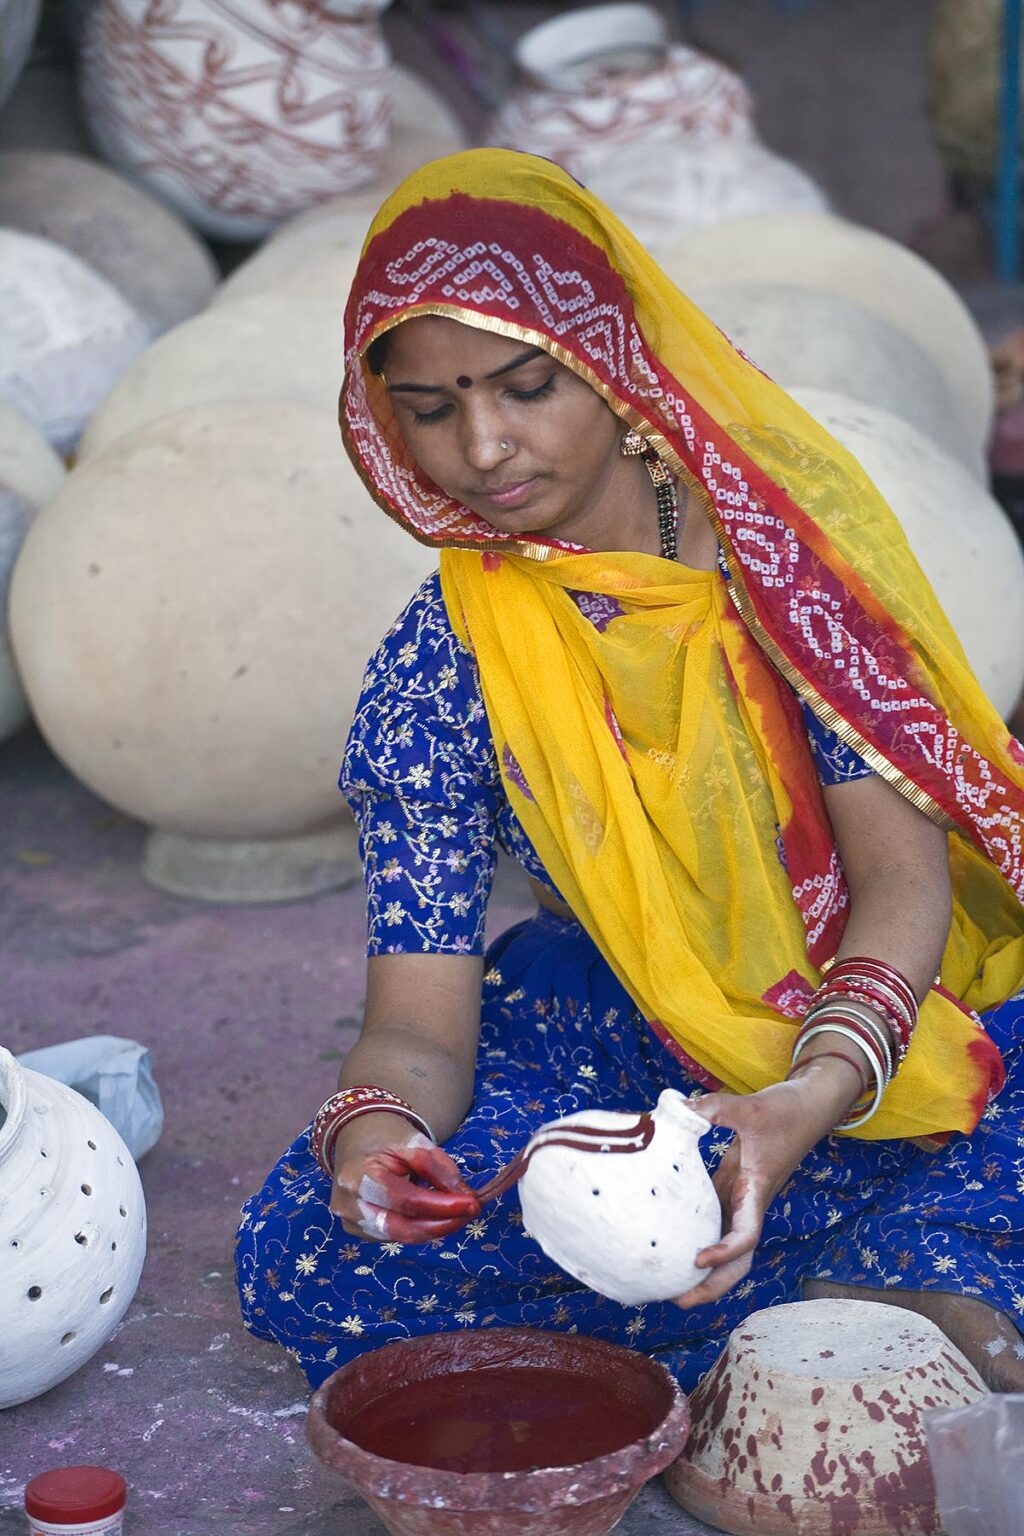 A Rajasthani woman paints a clay pot for the GANGUR FESTIVAL in JOHDPUR - RAJASTHAN, INDIA